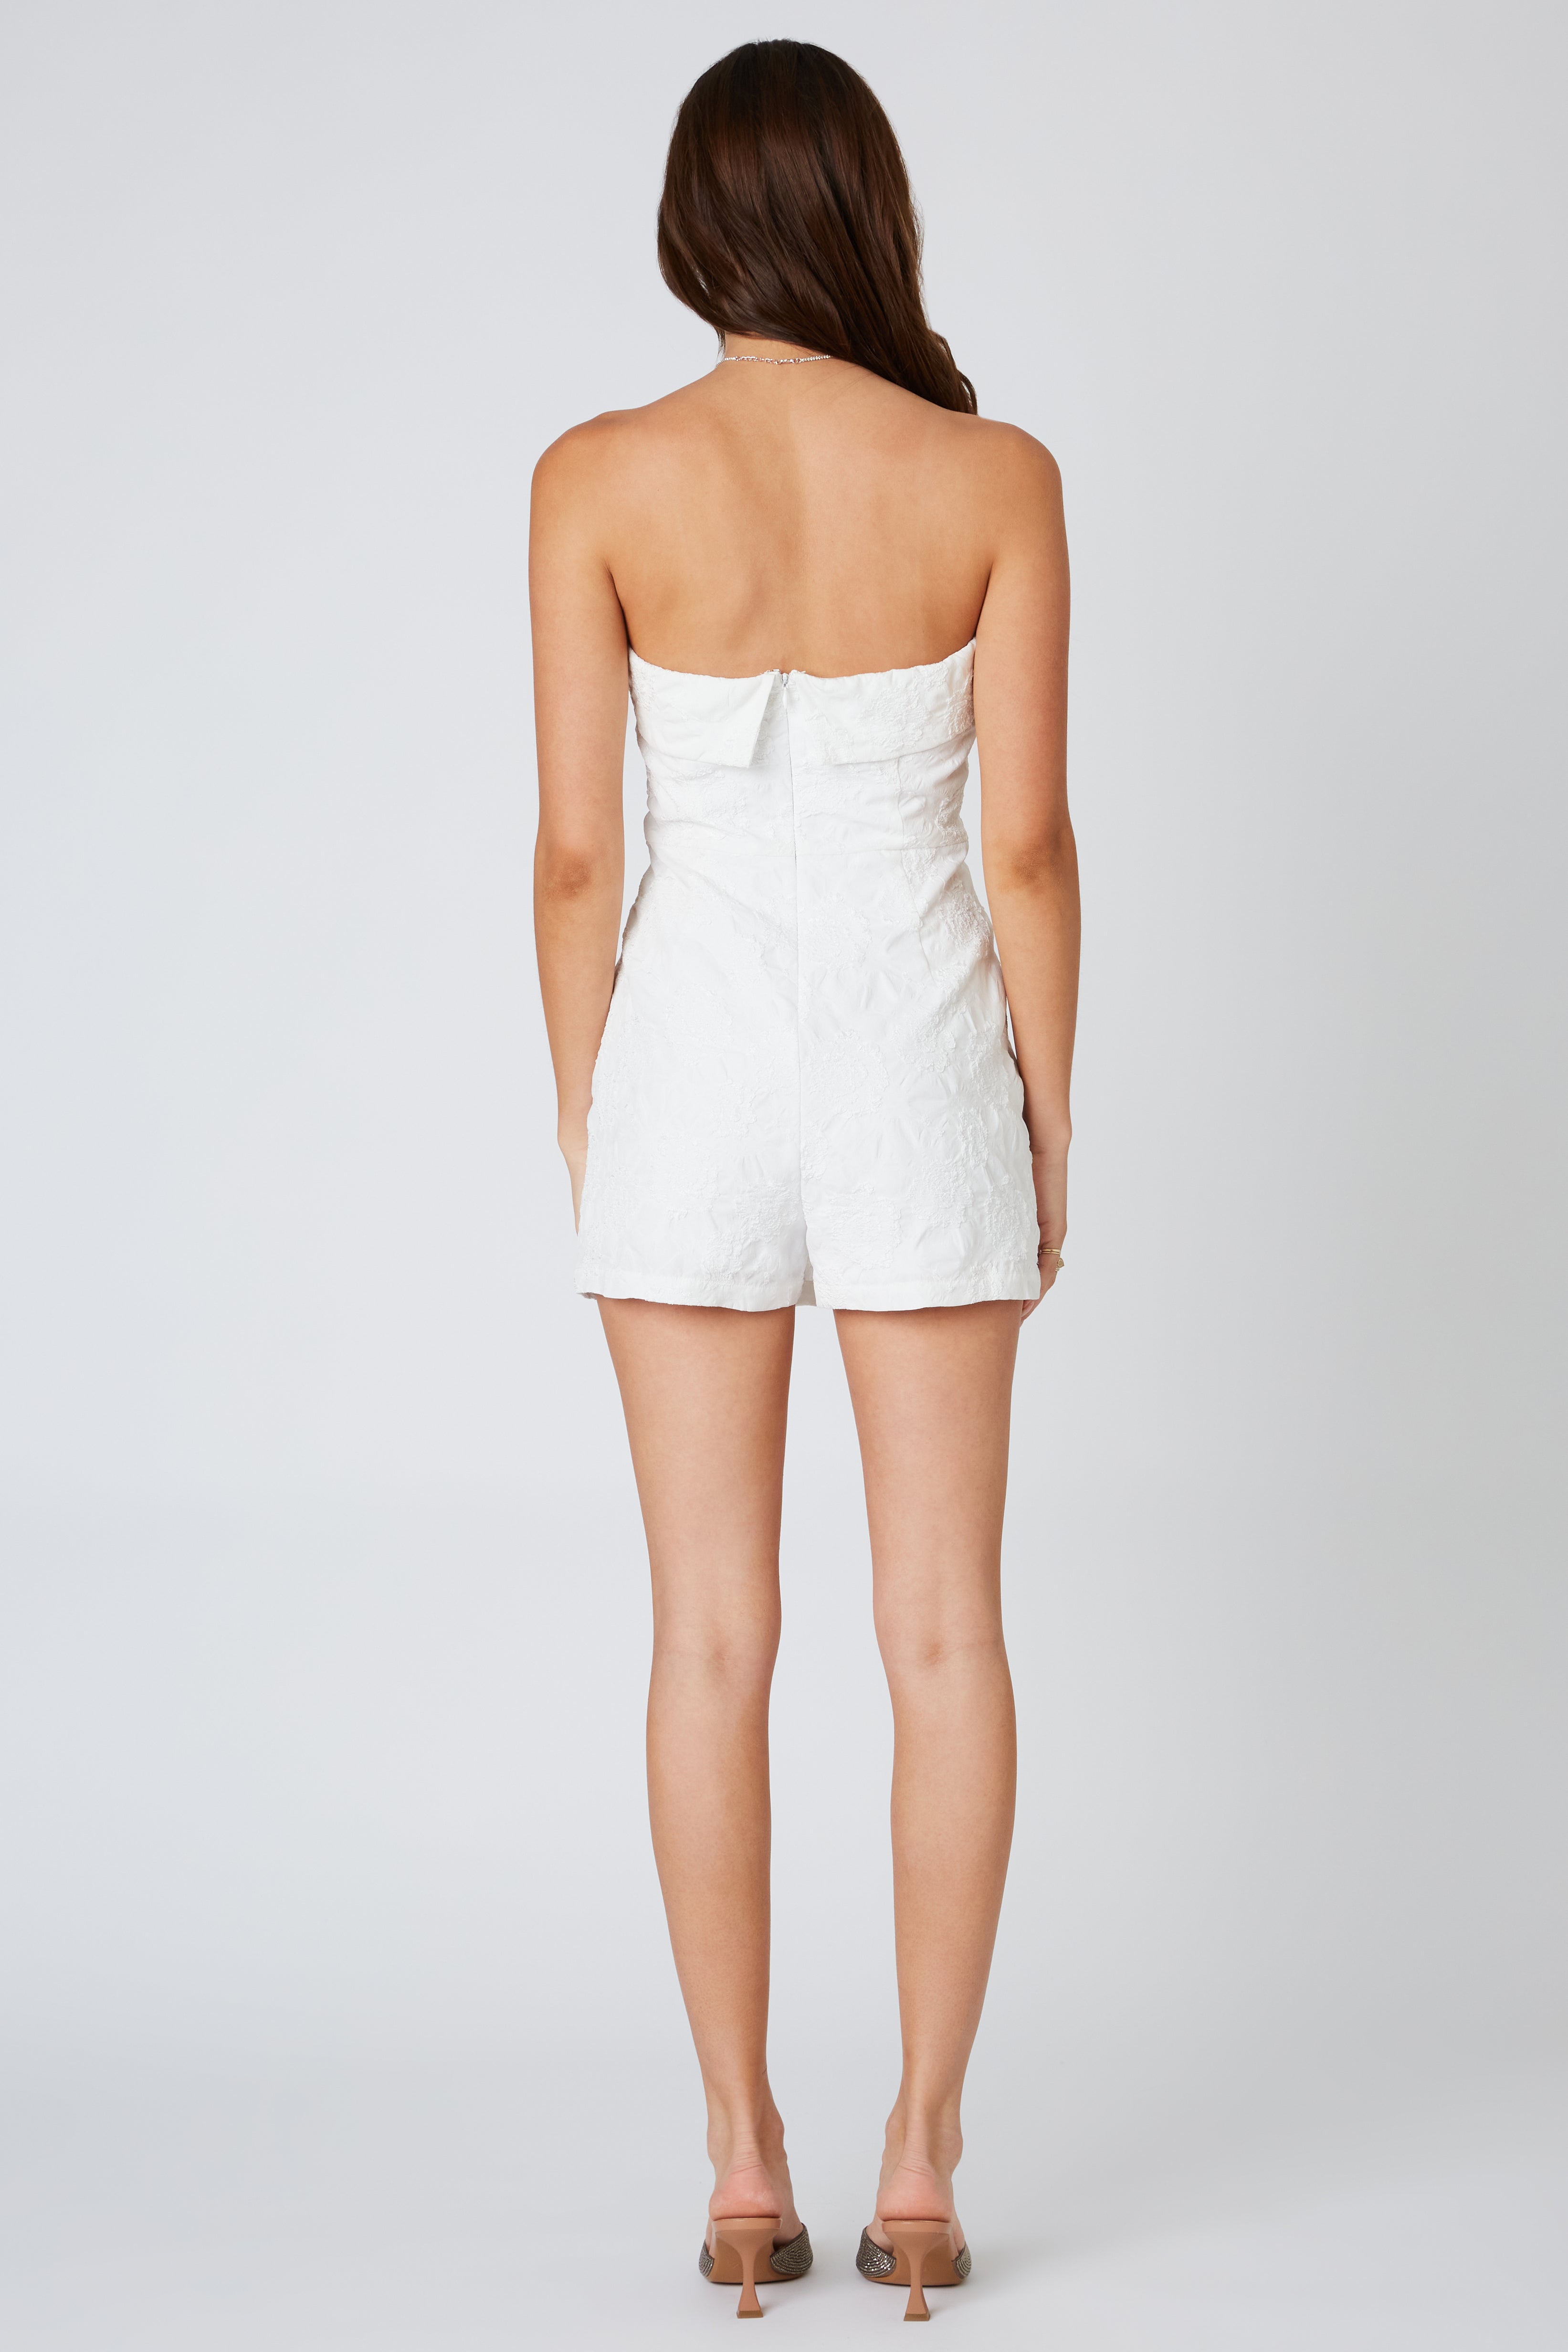 Jacquard Floral Romper in White Back View